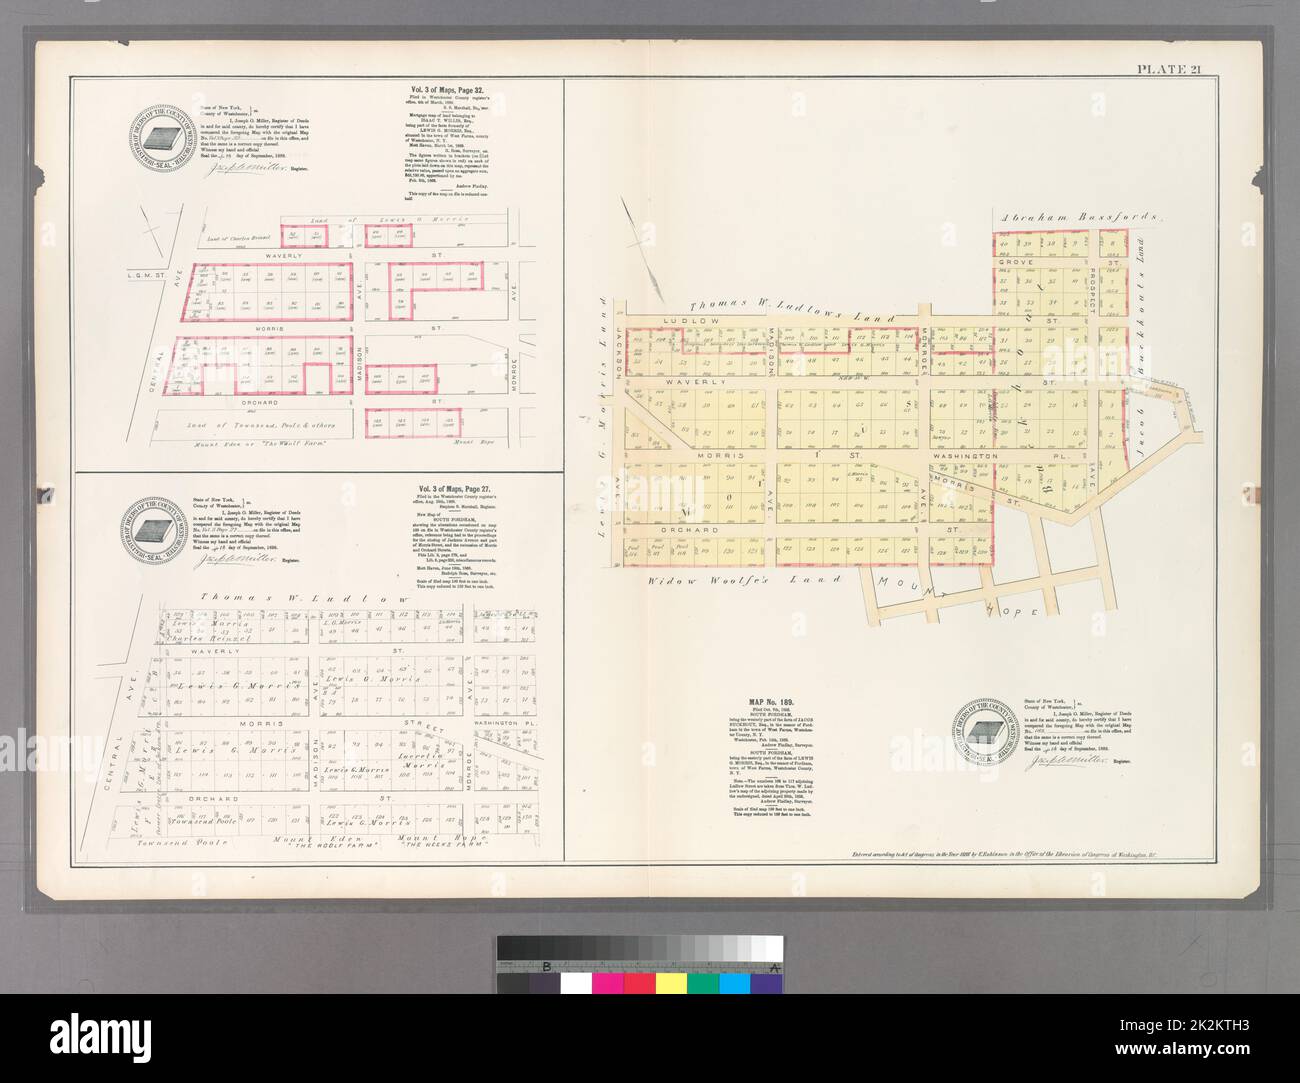 Cartographic, Maps. 1888 - 1897. Lionel Pincus and Princess Firyal Map Division. Bronx (New York, N.Y.) Plate 21: Vol. 3 of Maps, Page 32 Bounded by Waverly St., Monroe Ave., Orchard St., and Central Ave. - Map No. 189: Bounded by Ludlow St., Prescott Ave., Morris St., Monroe Ave., Orchard St. and Jackson Ave. - Vol. 3 of Maps, page 27: Bounded by Waverly St., Monroe Ave., Orchard St. and Central Ave. Stock Photo